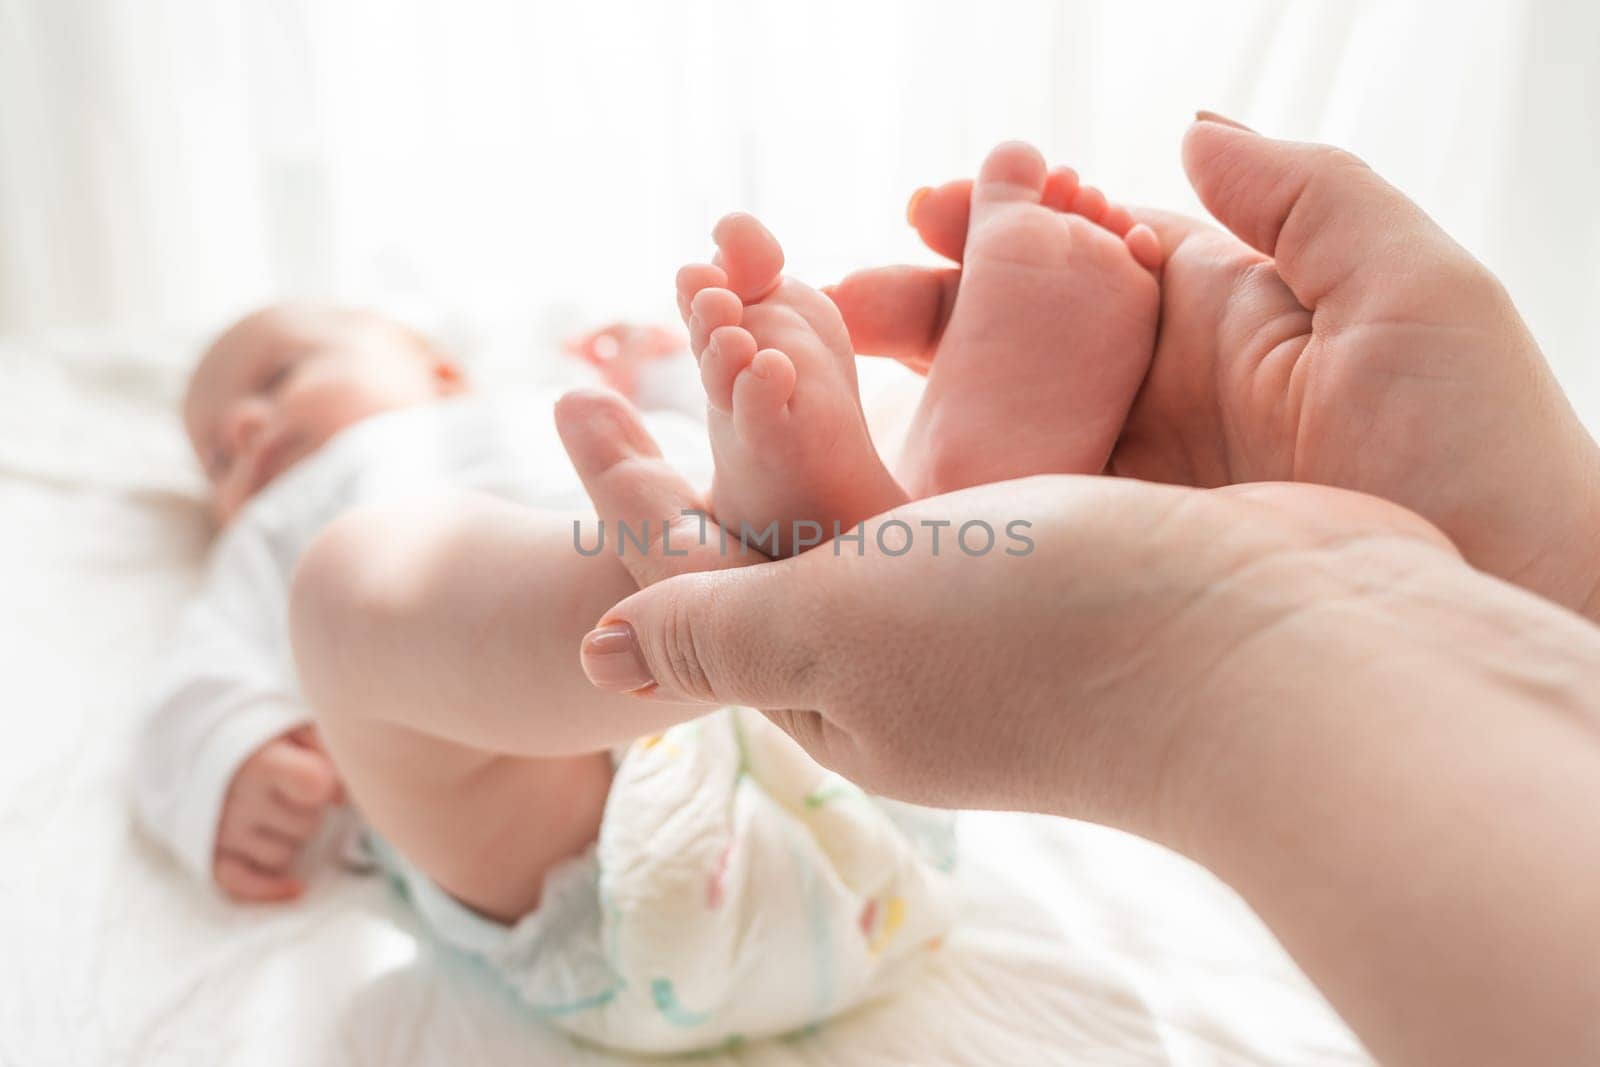 Mother's hands gently cradle the tiny feet of her newborn, showcasing pure love and bonding